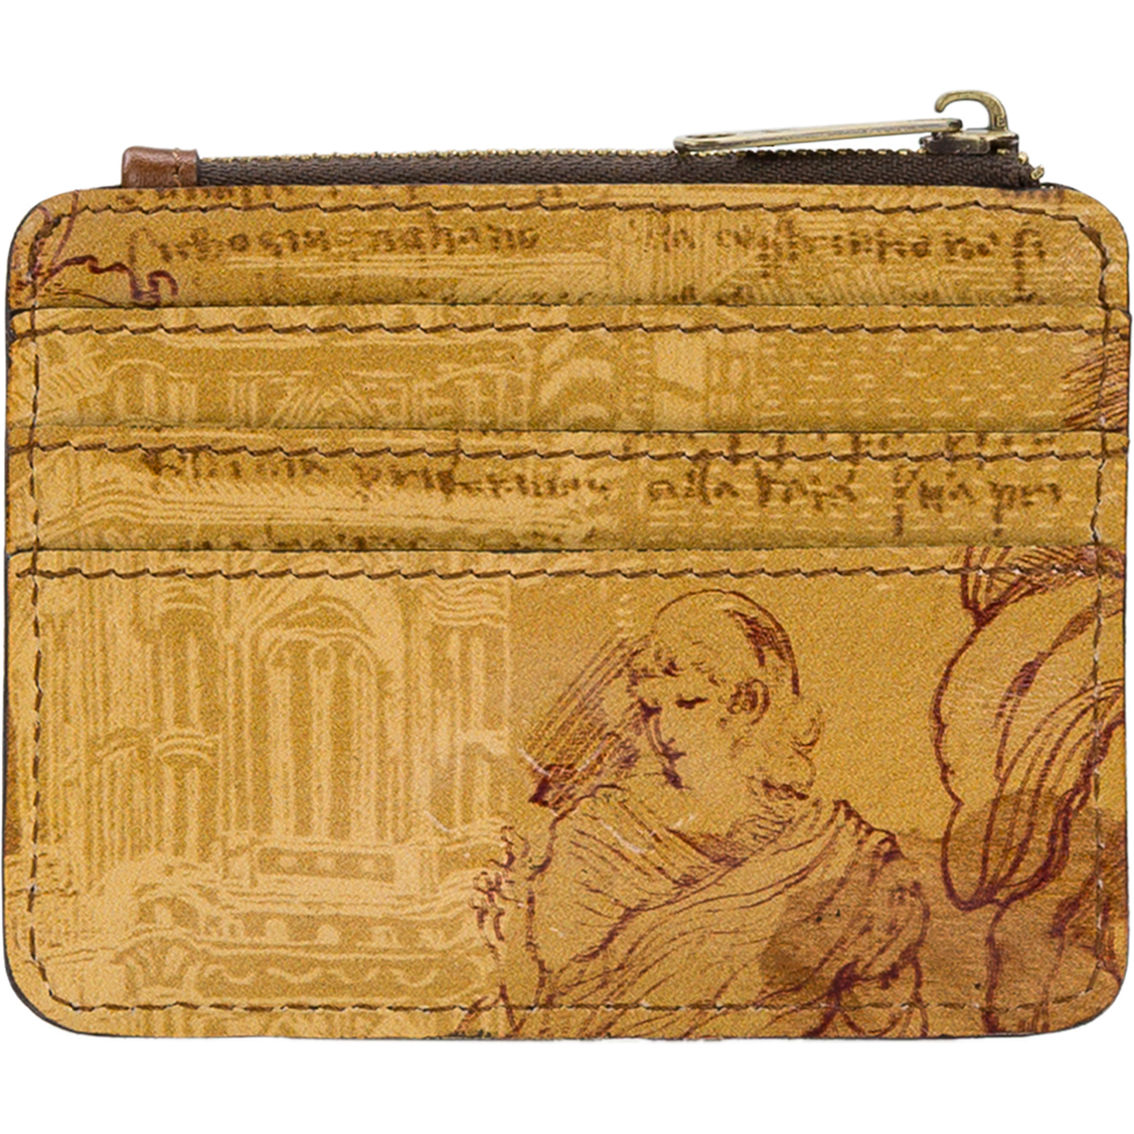 Patricia Nash Cassis ID Wallet - Image 2 of 4